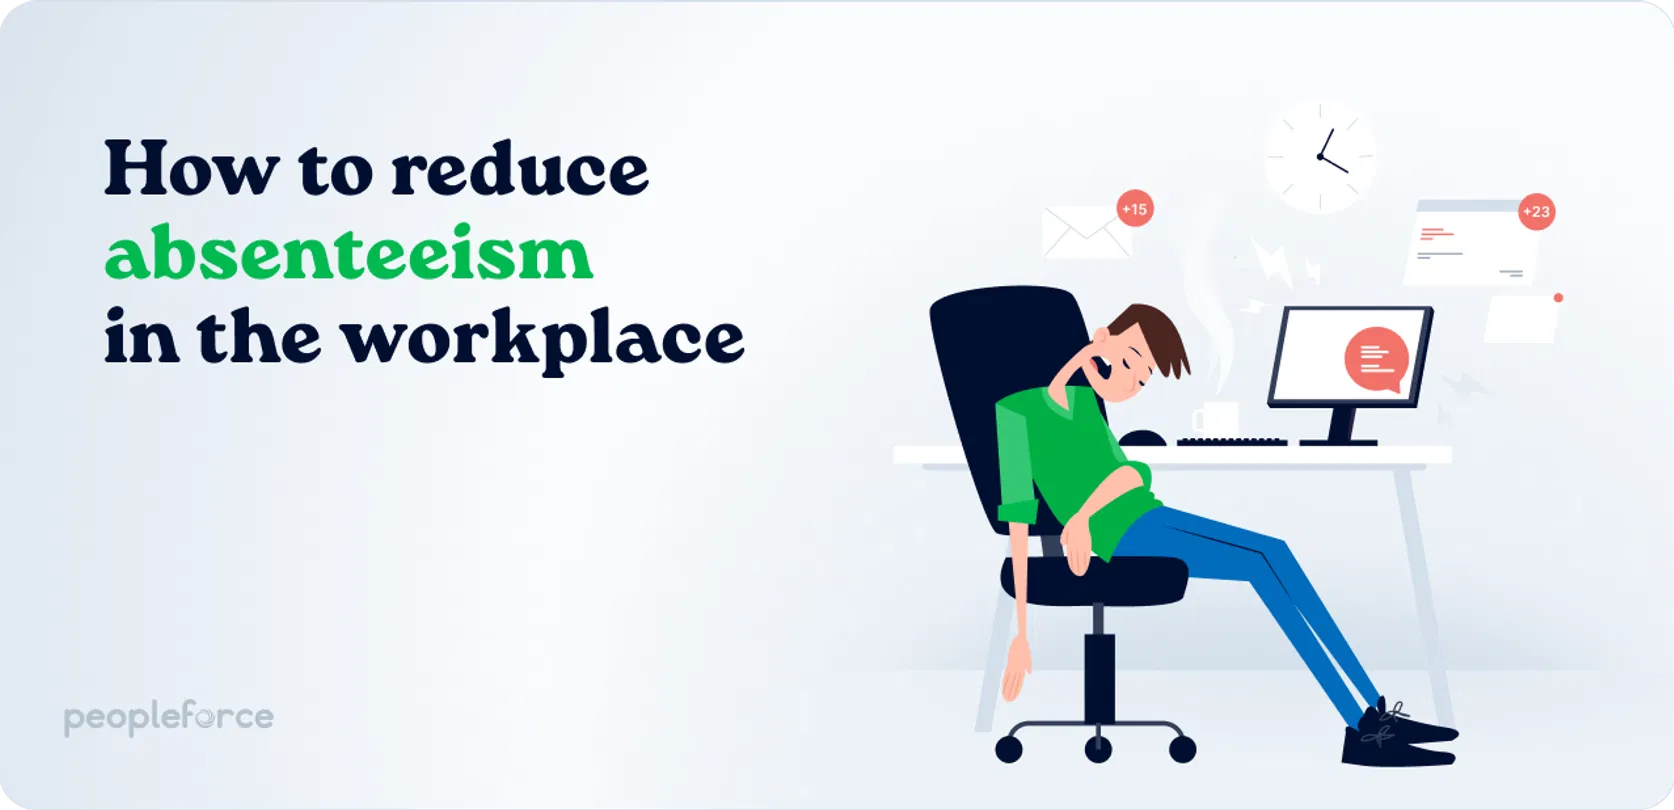 How to reduce absenteeism in the workplace